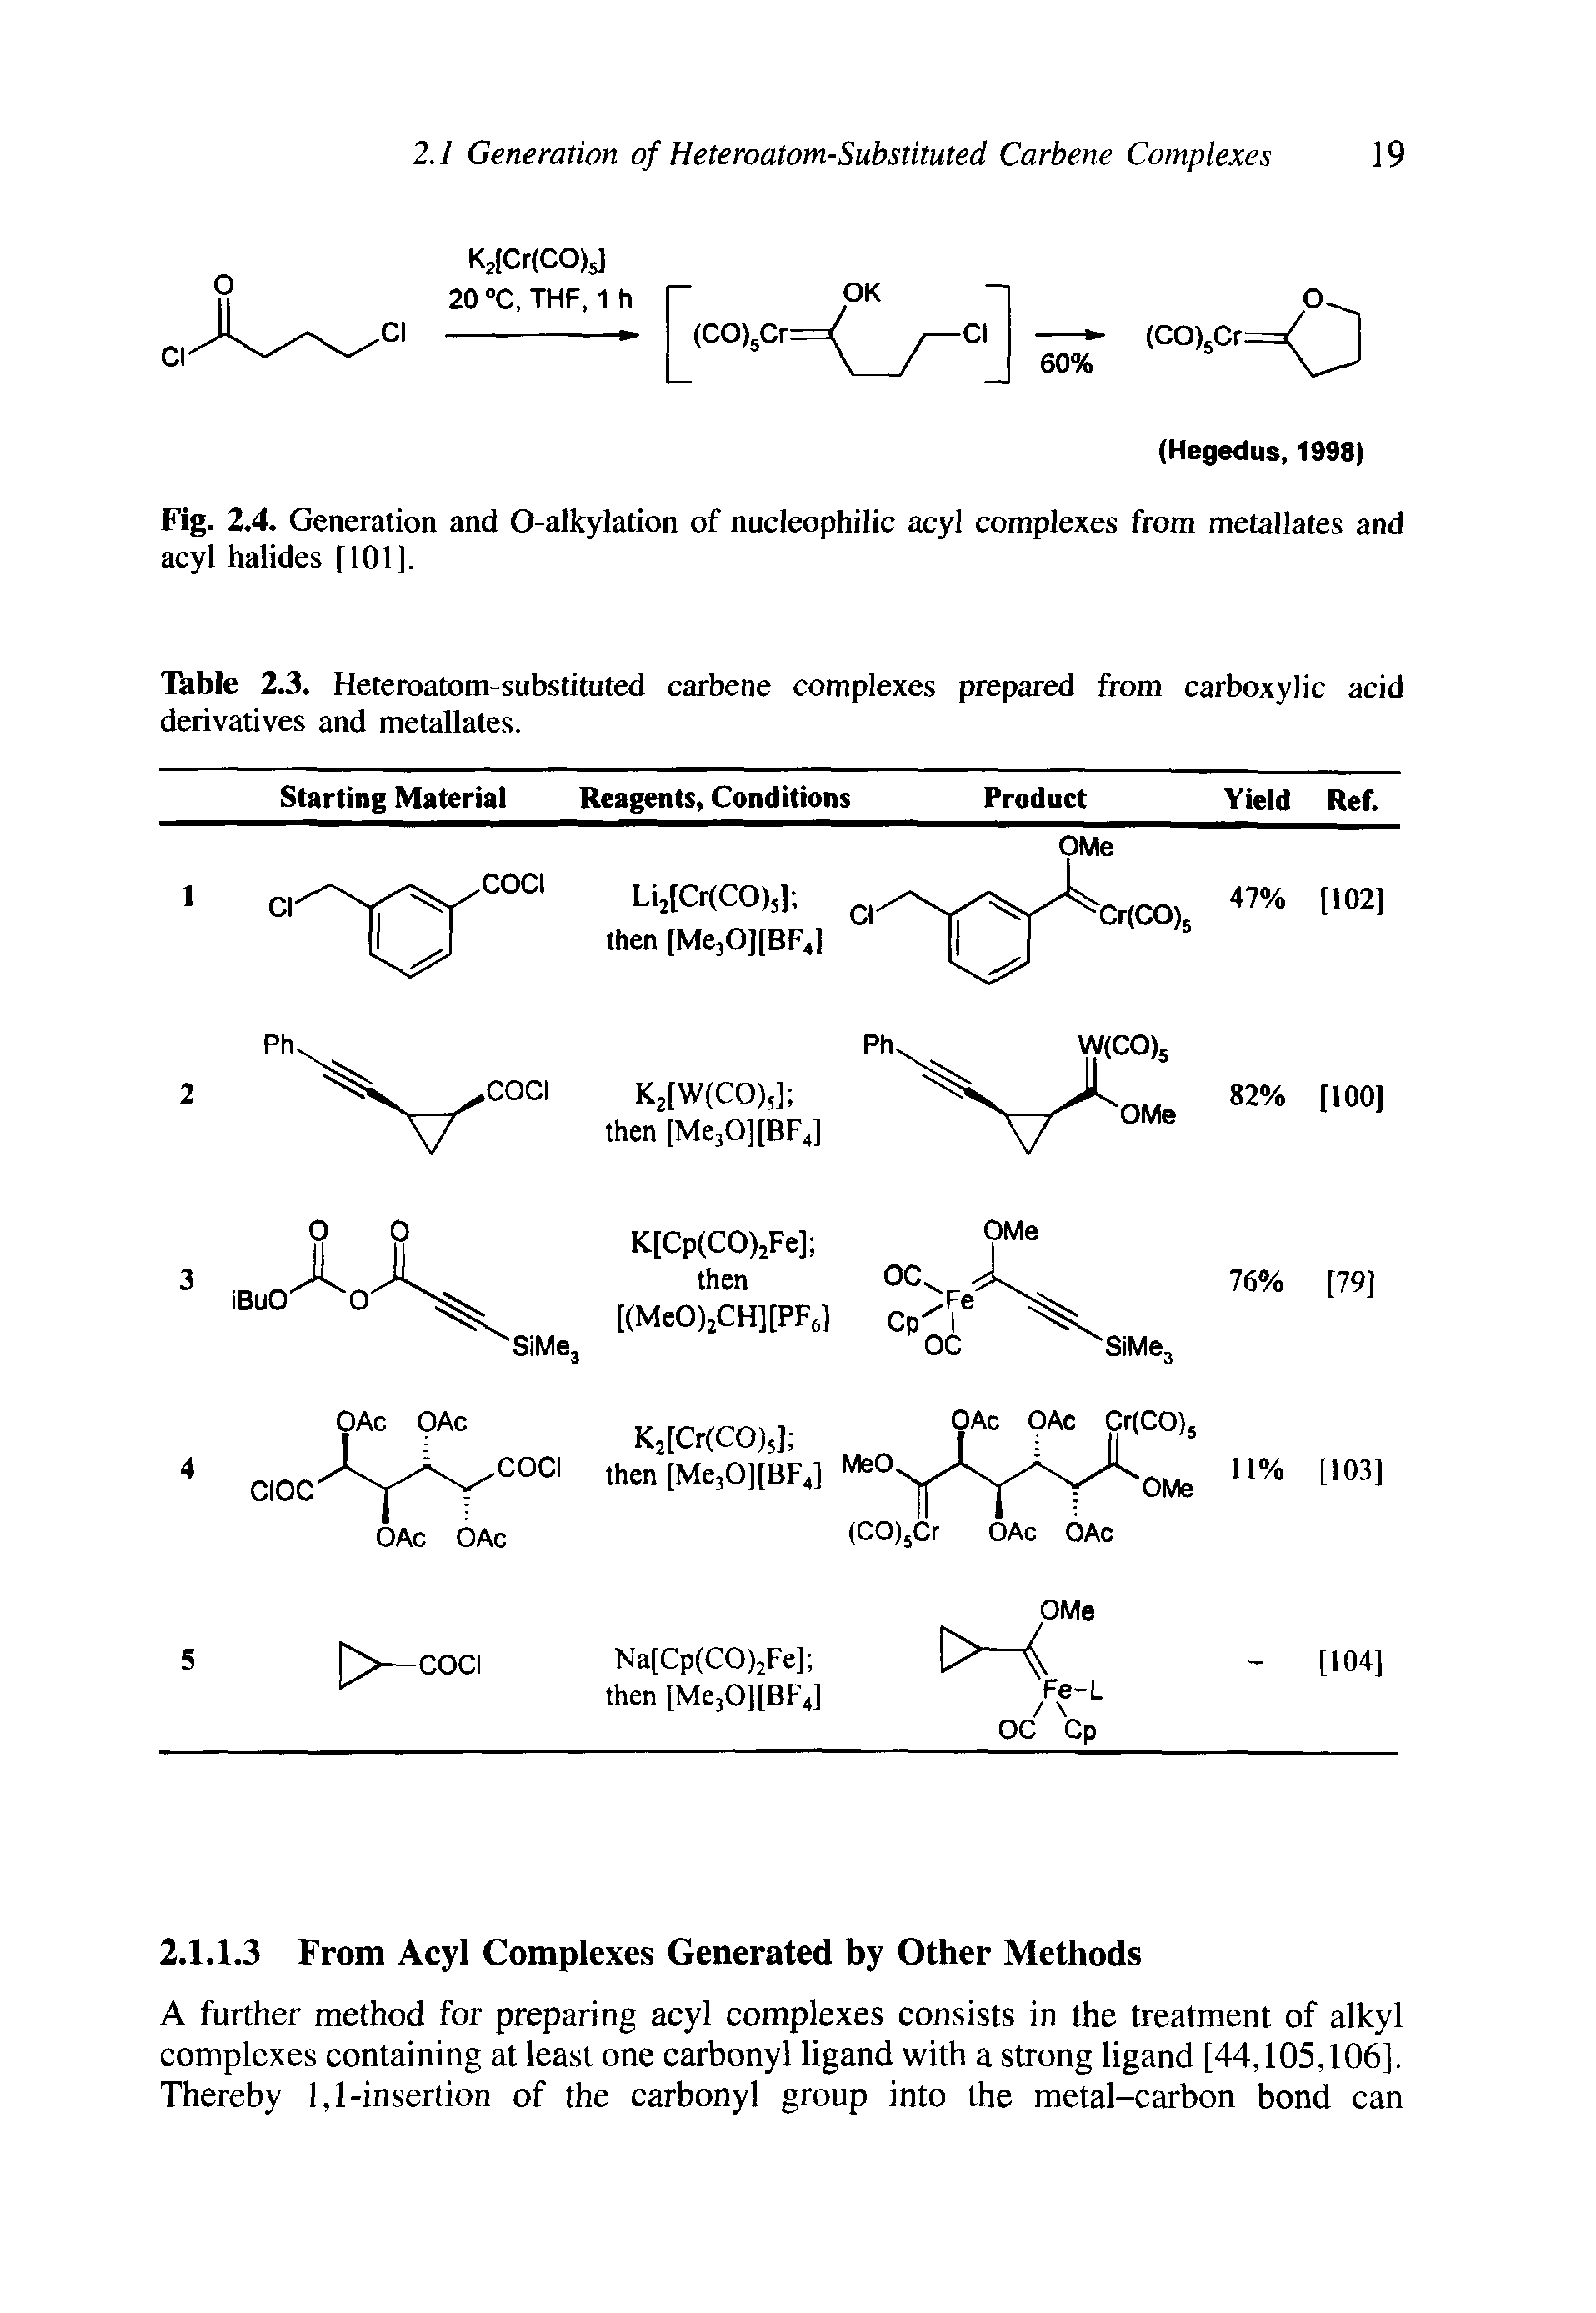 Fig. 2.4. Generation and O-alkylation of nucleophilic acyl complexes from metallates and acyl halides [101].